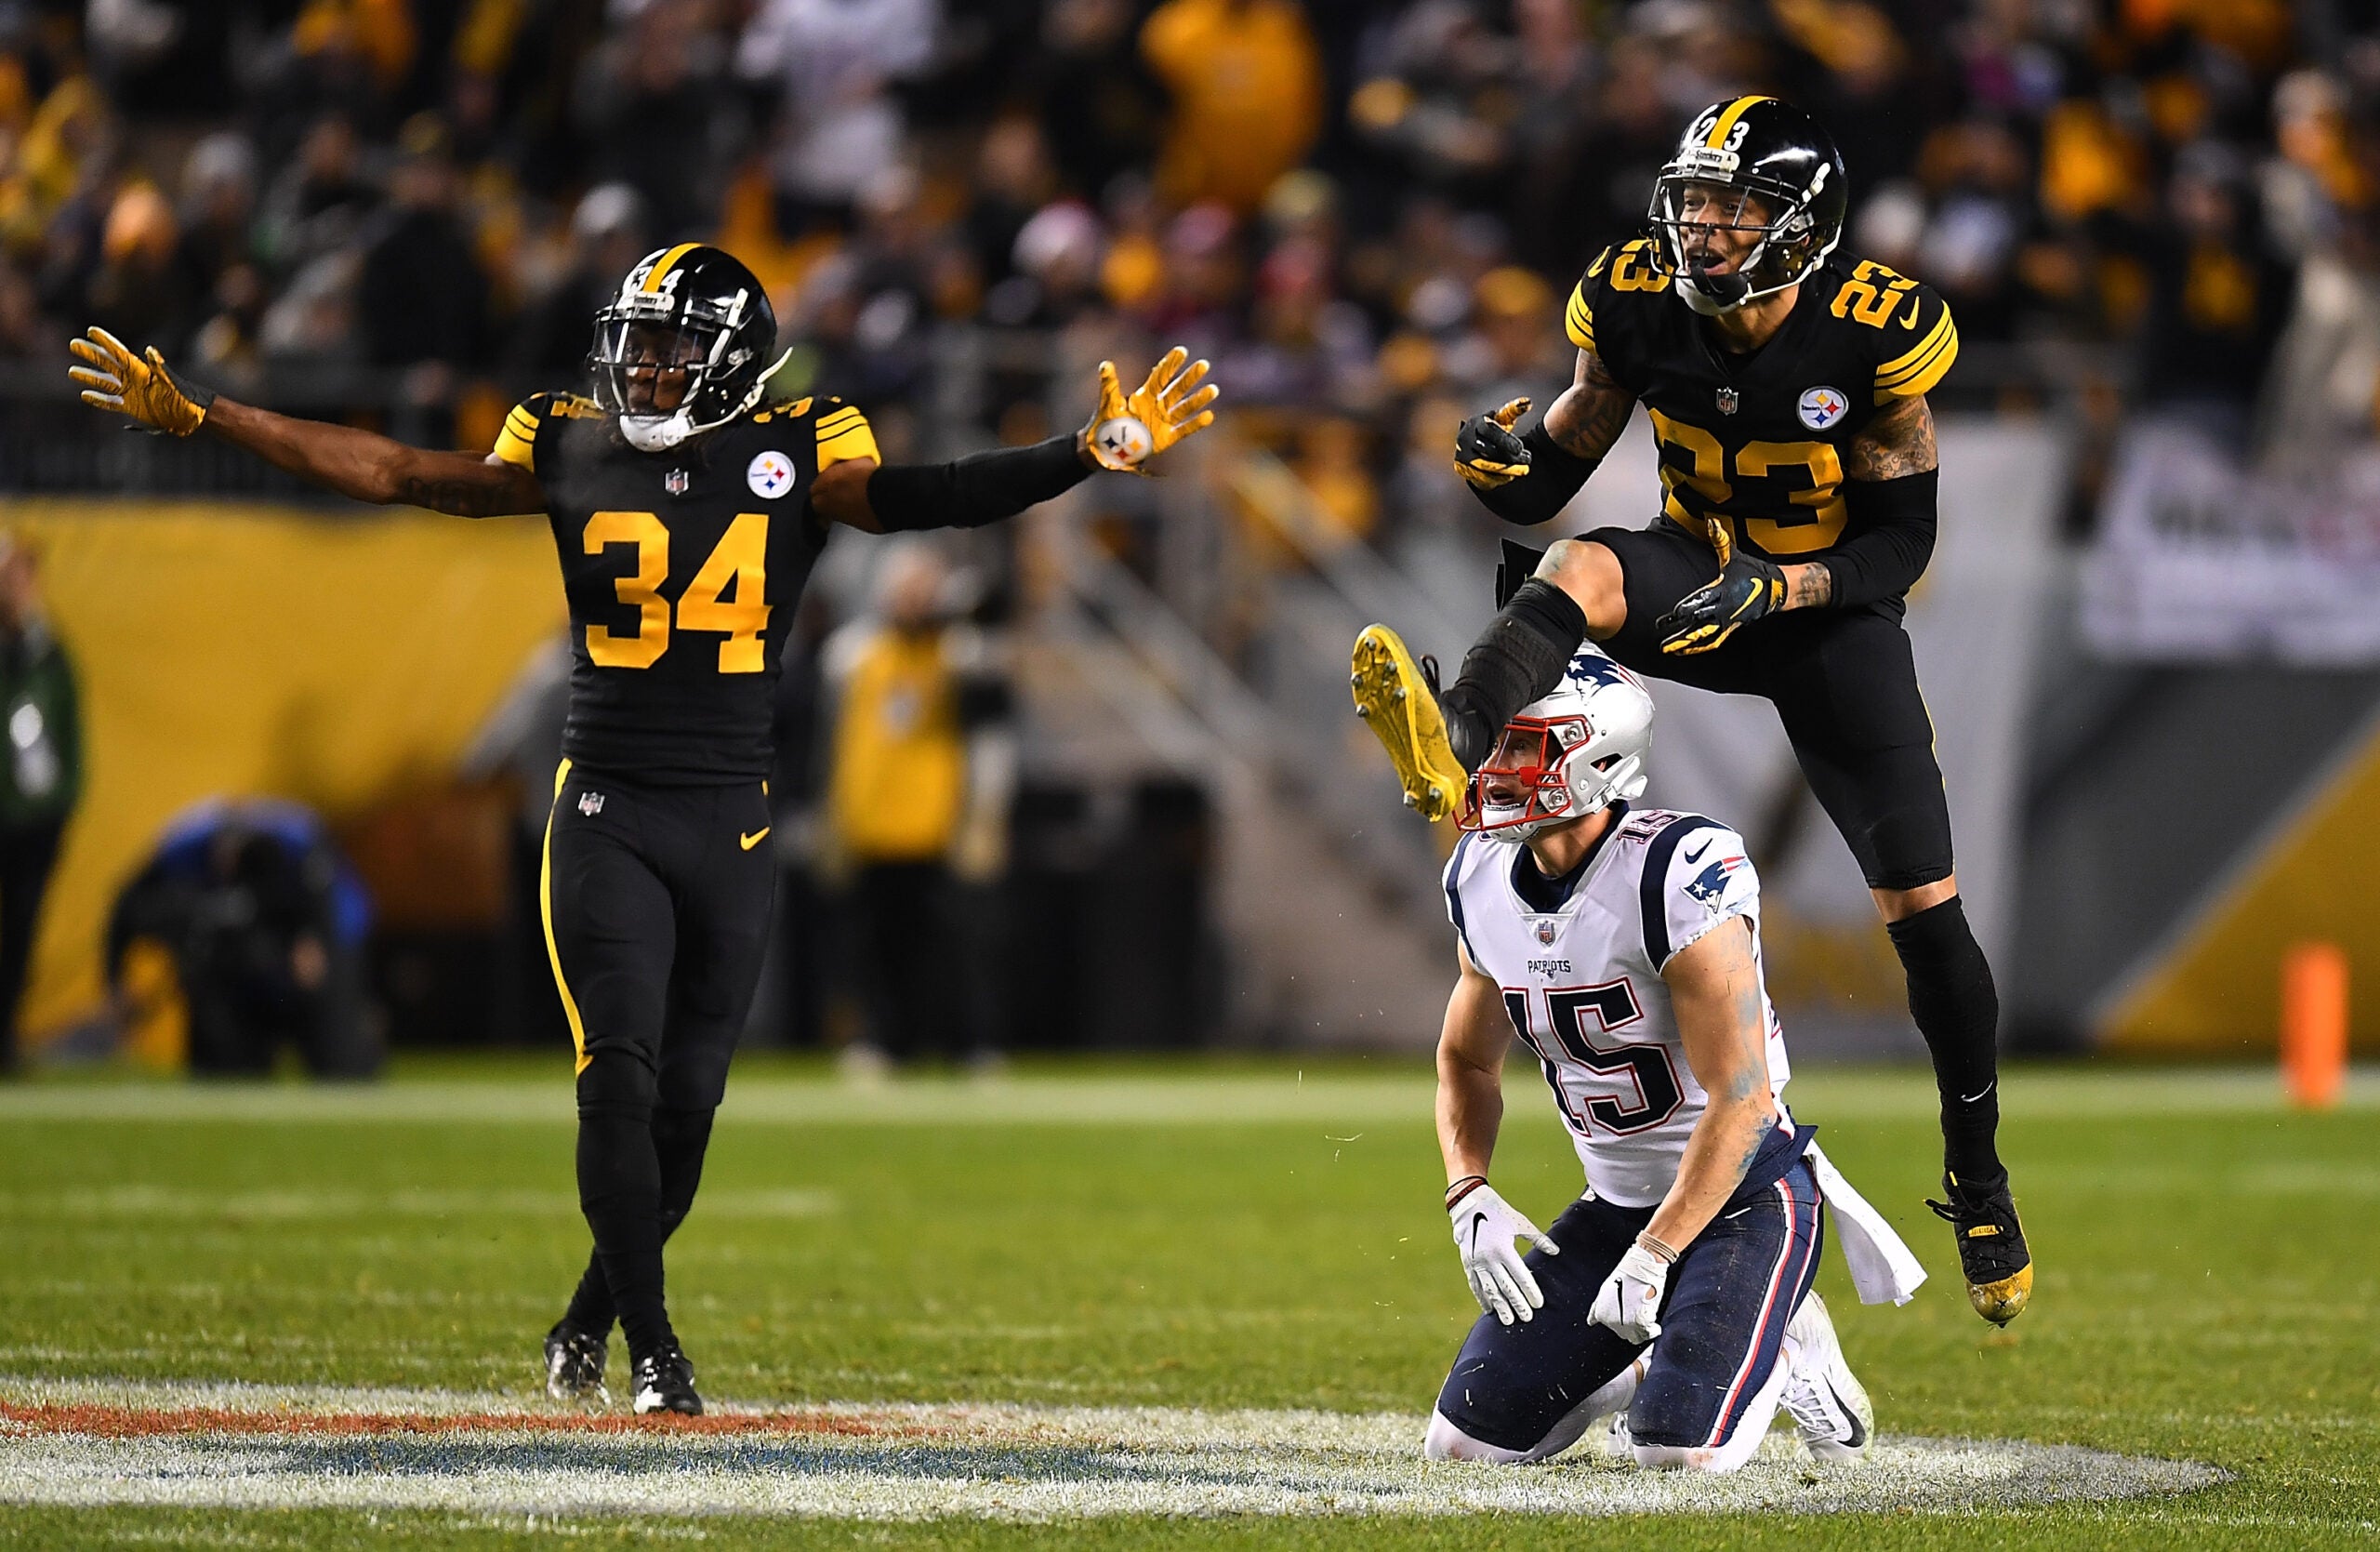 Missed opportunities haunt Steelers in loss to Ravens